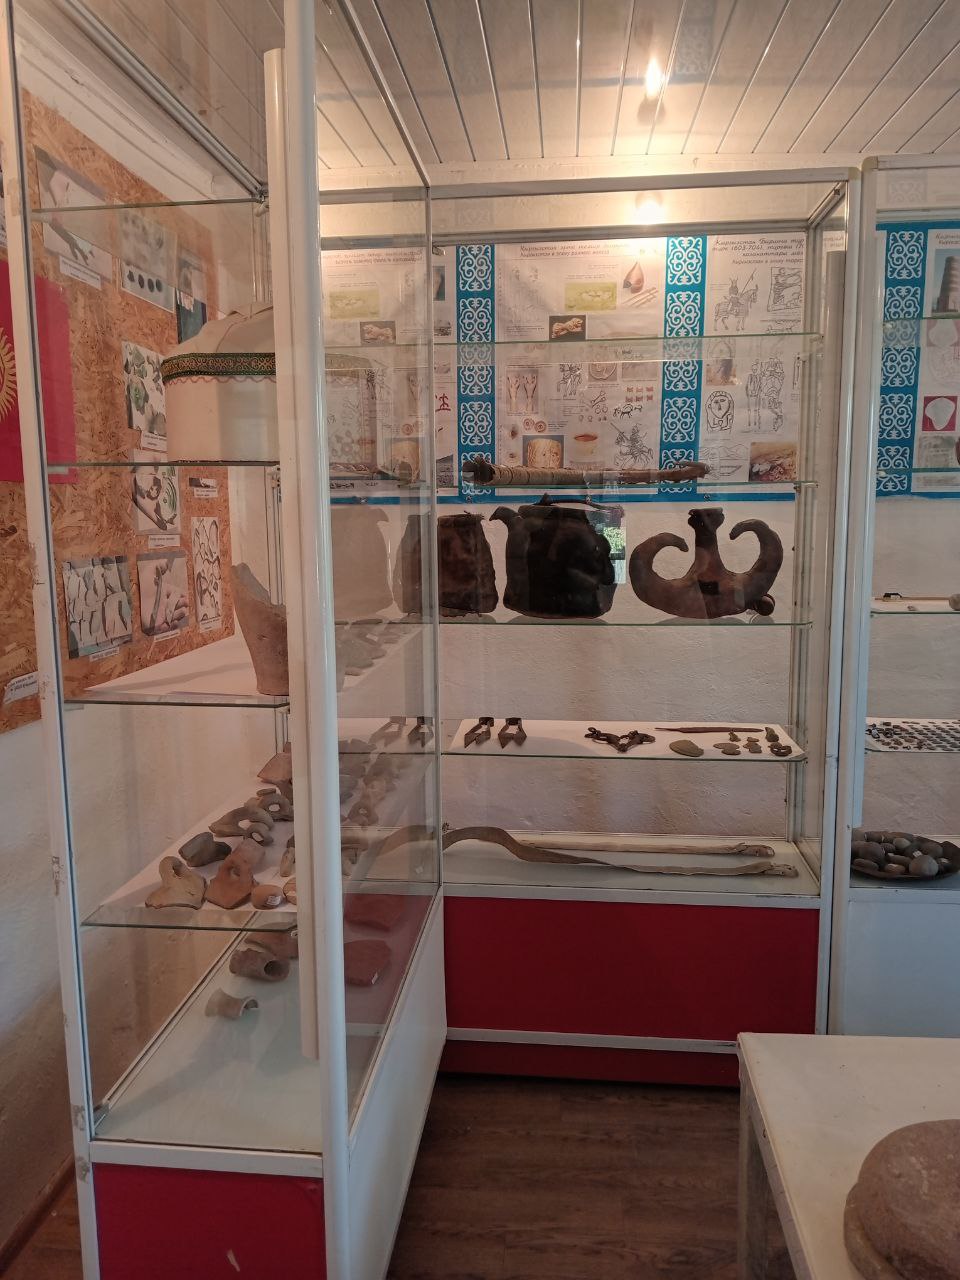 corner of a room. glass display cases with various old artifacts inside and posters on the walls